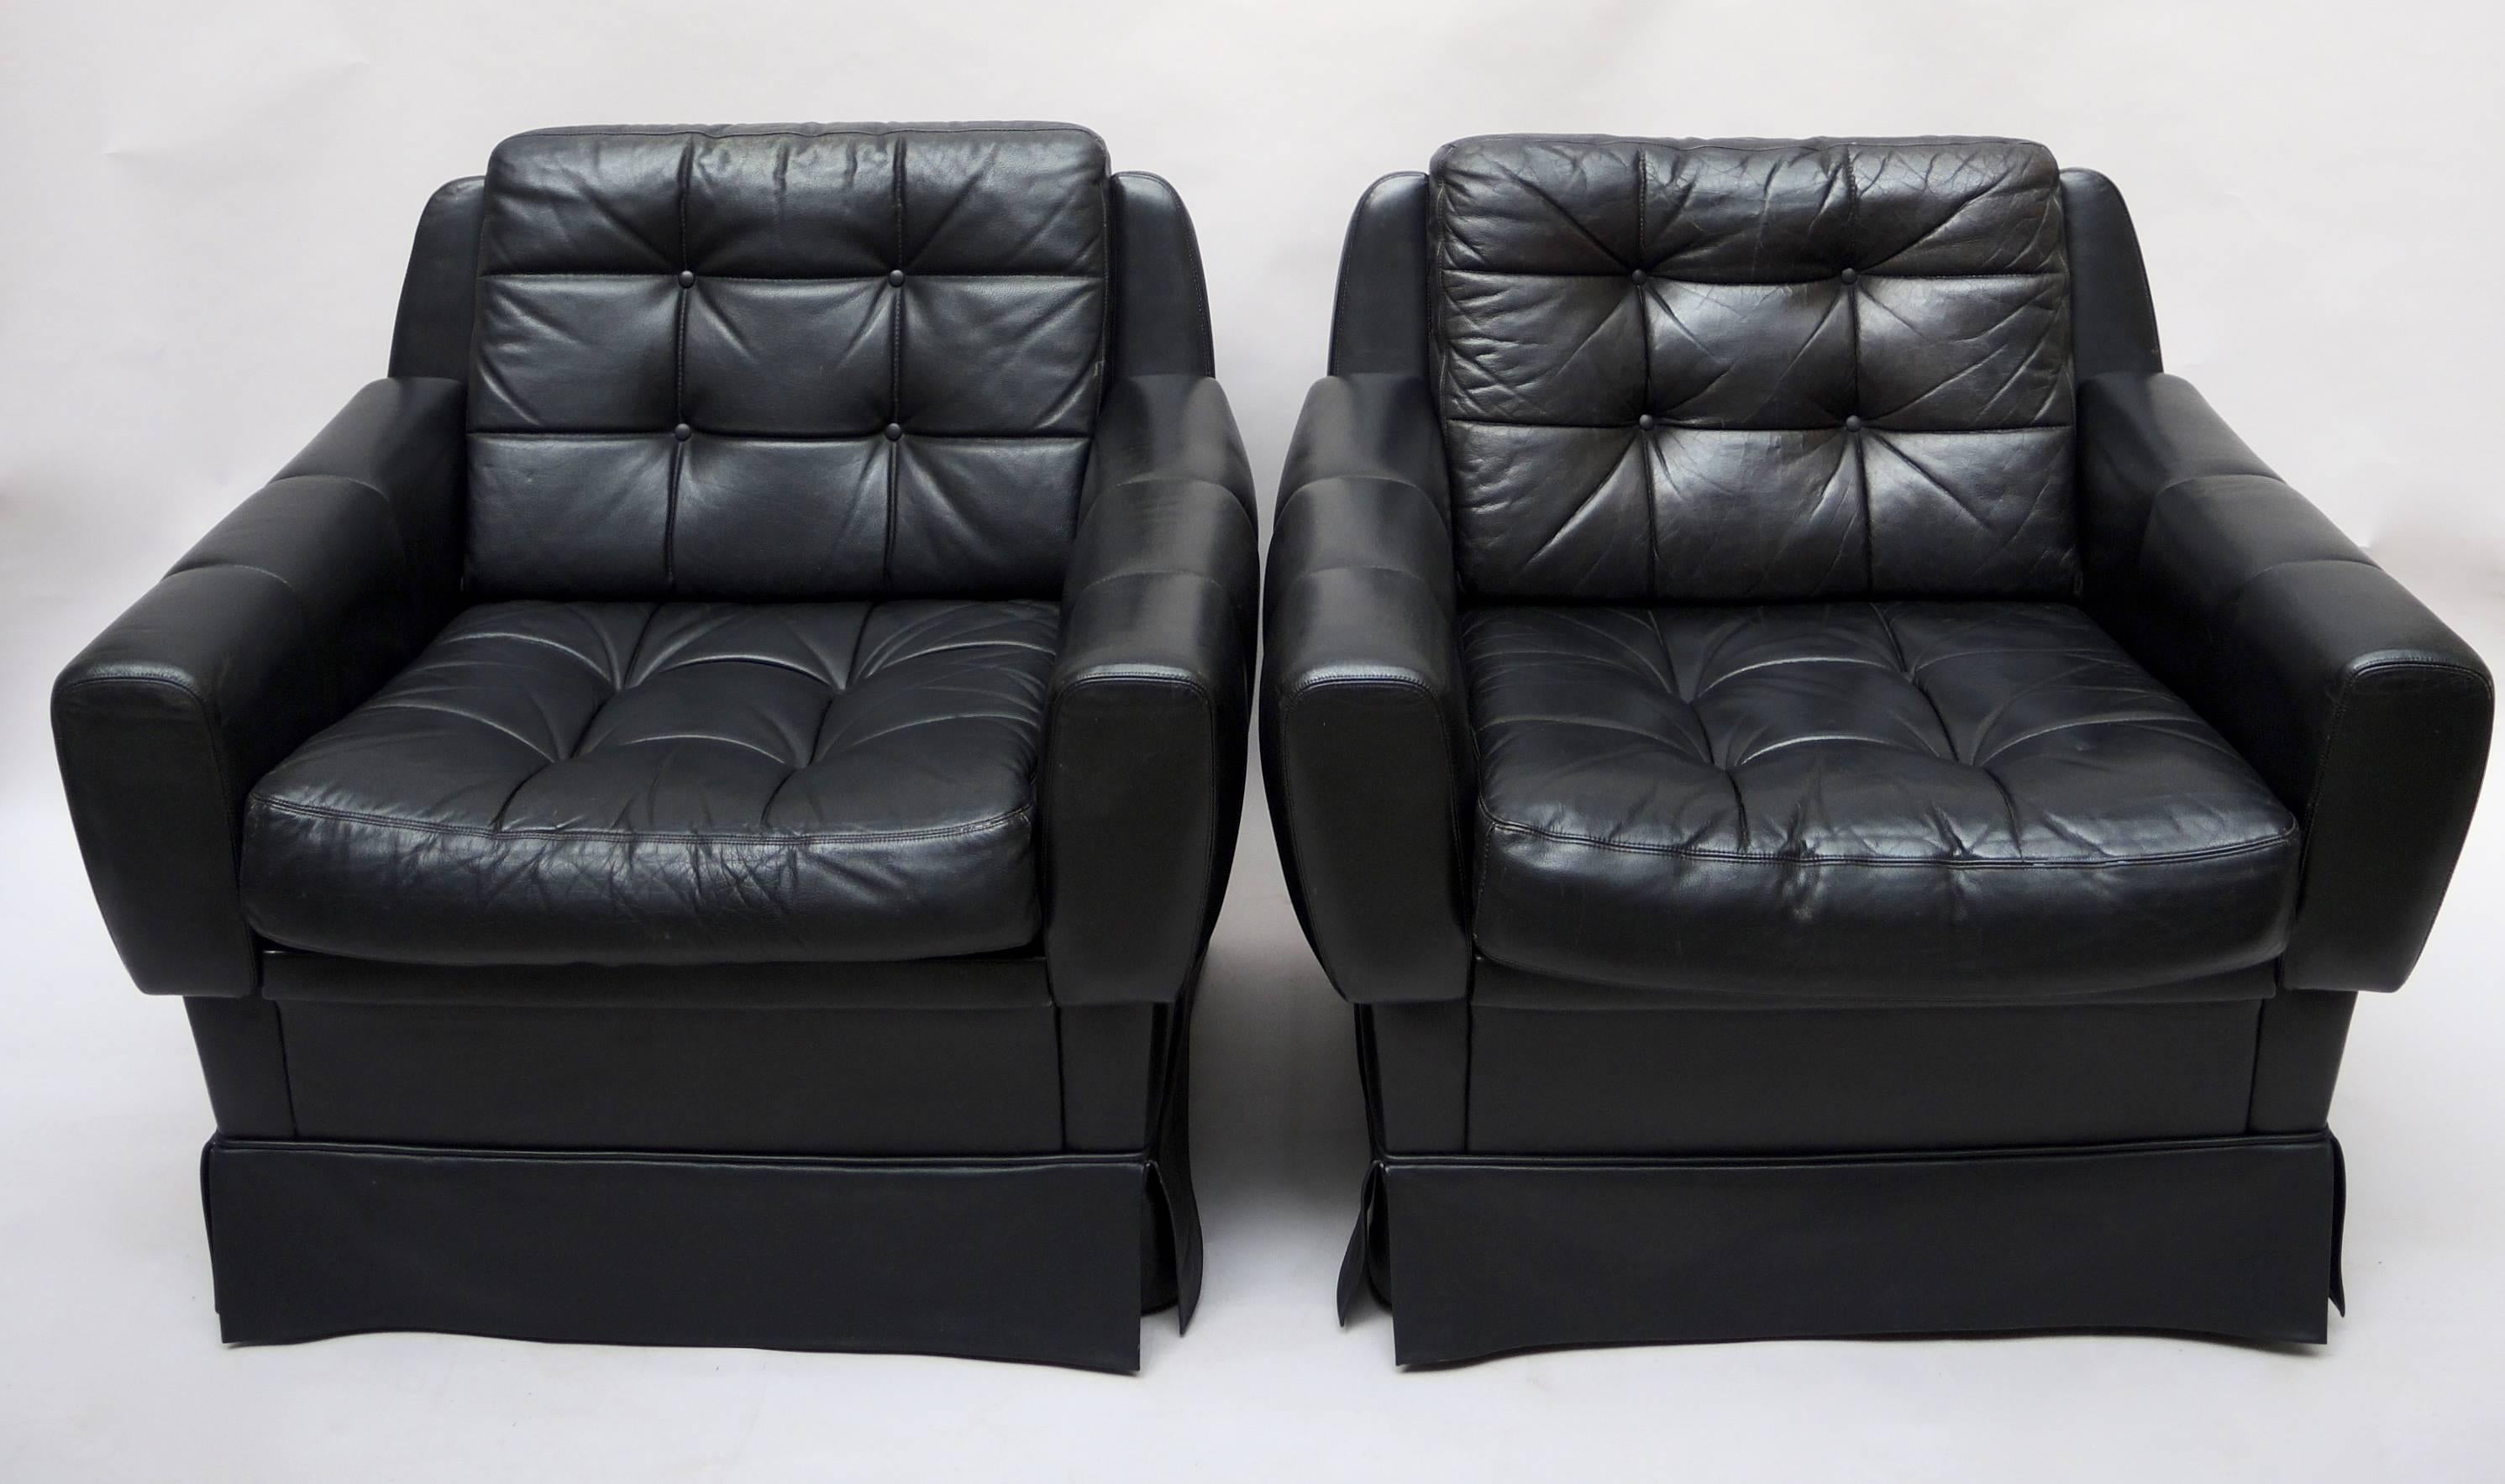 A pair of 1960s Mid-Century Modern black leather club chairs made in West Germany by Profilia. Very comfortable and in good condition.